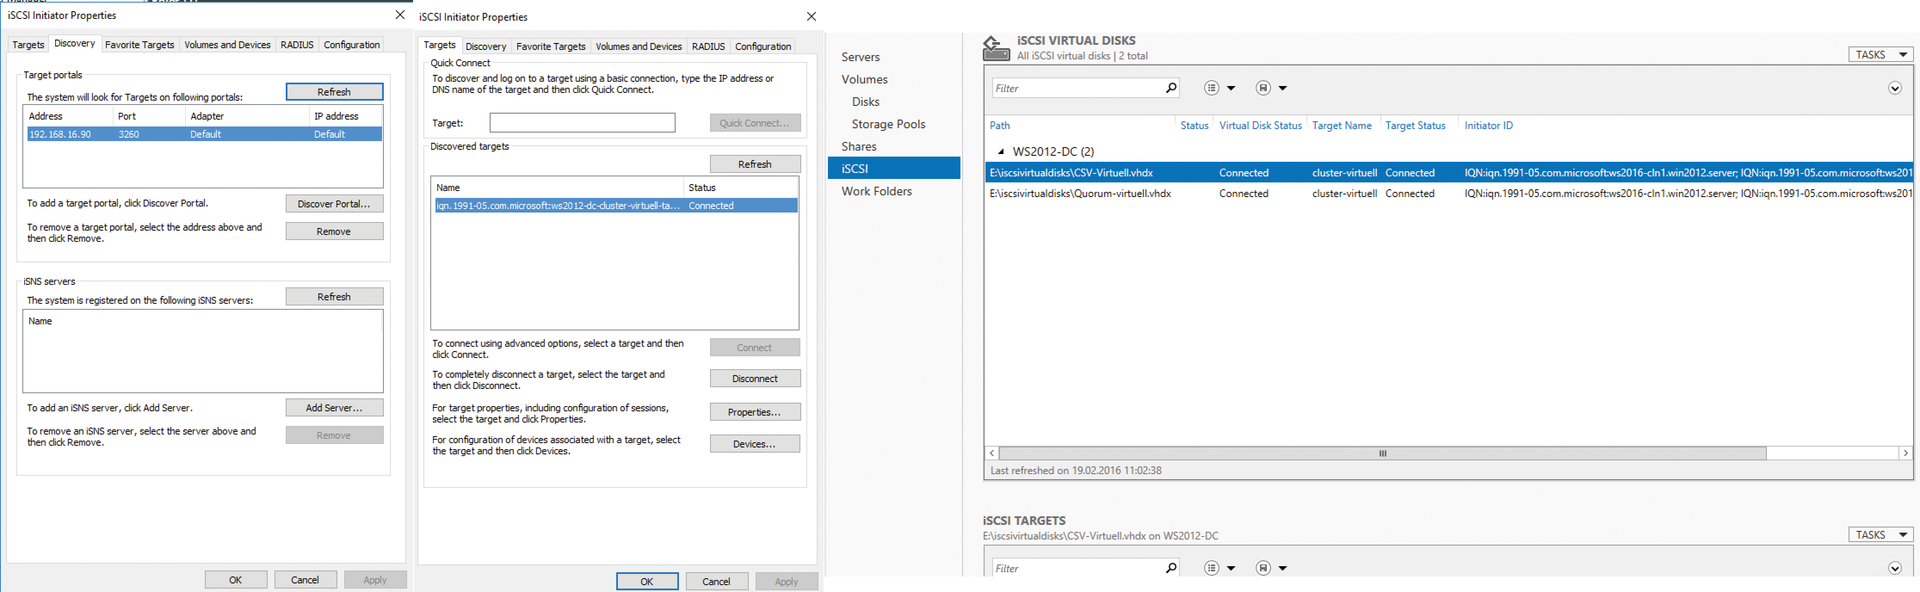 Configuring the iSCSI target server and connecting the LUN through the iSCSI initiator. 